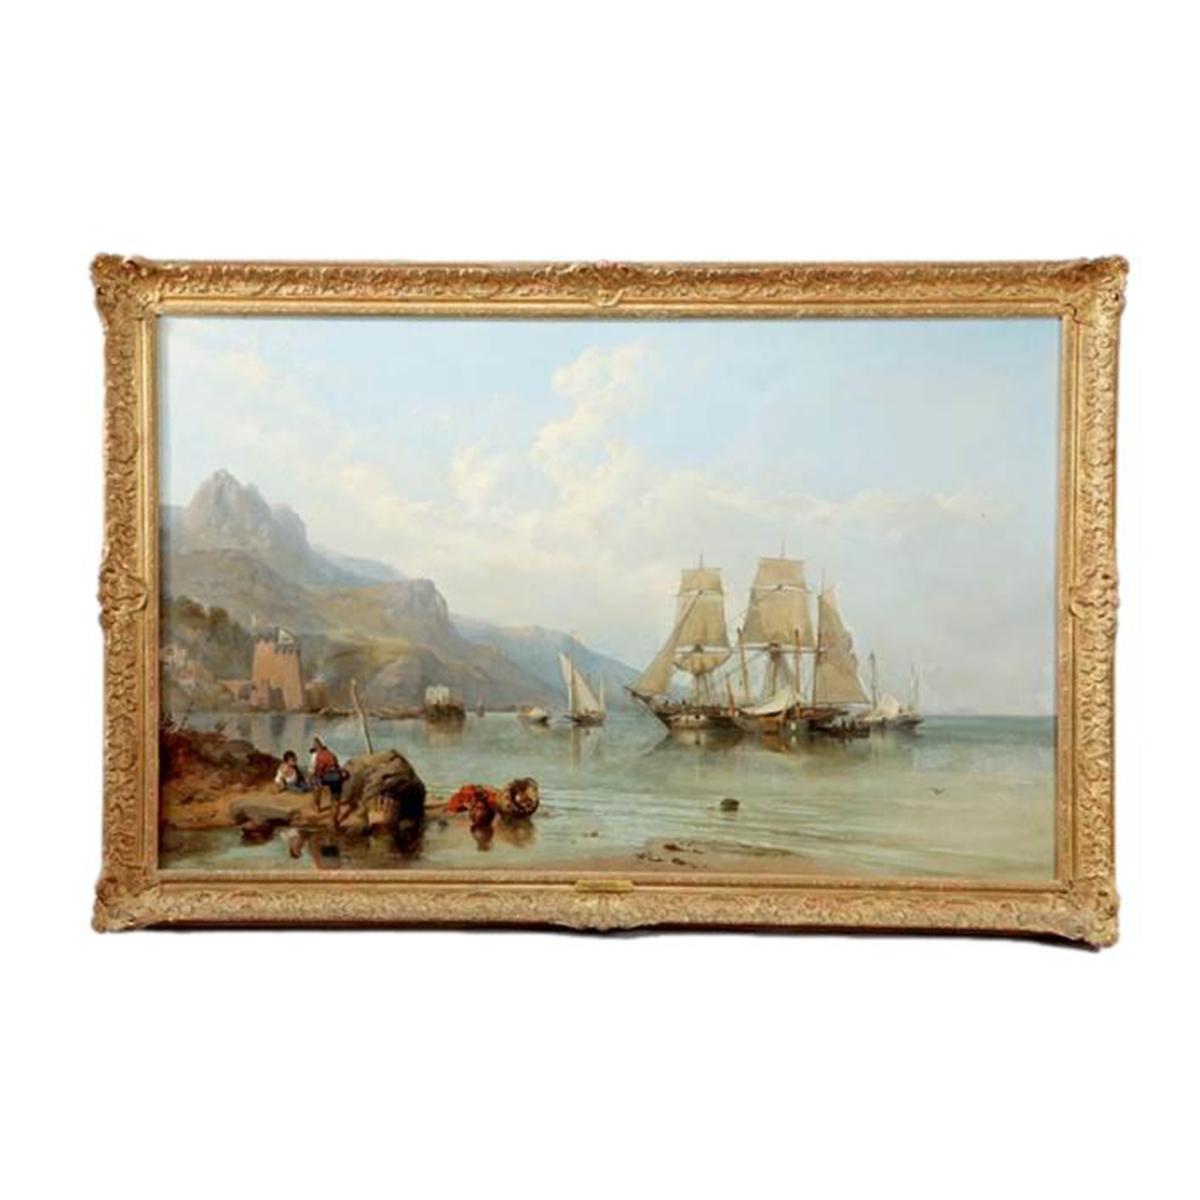 Clarkson Stanfield: The Gulf of Salerno